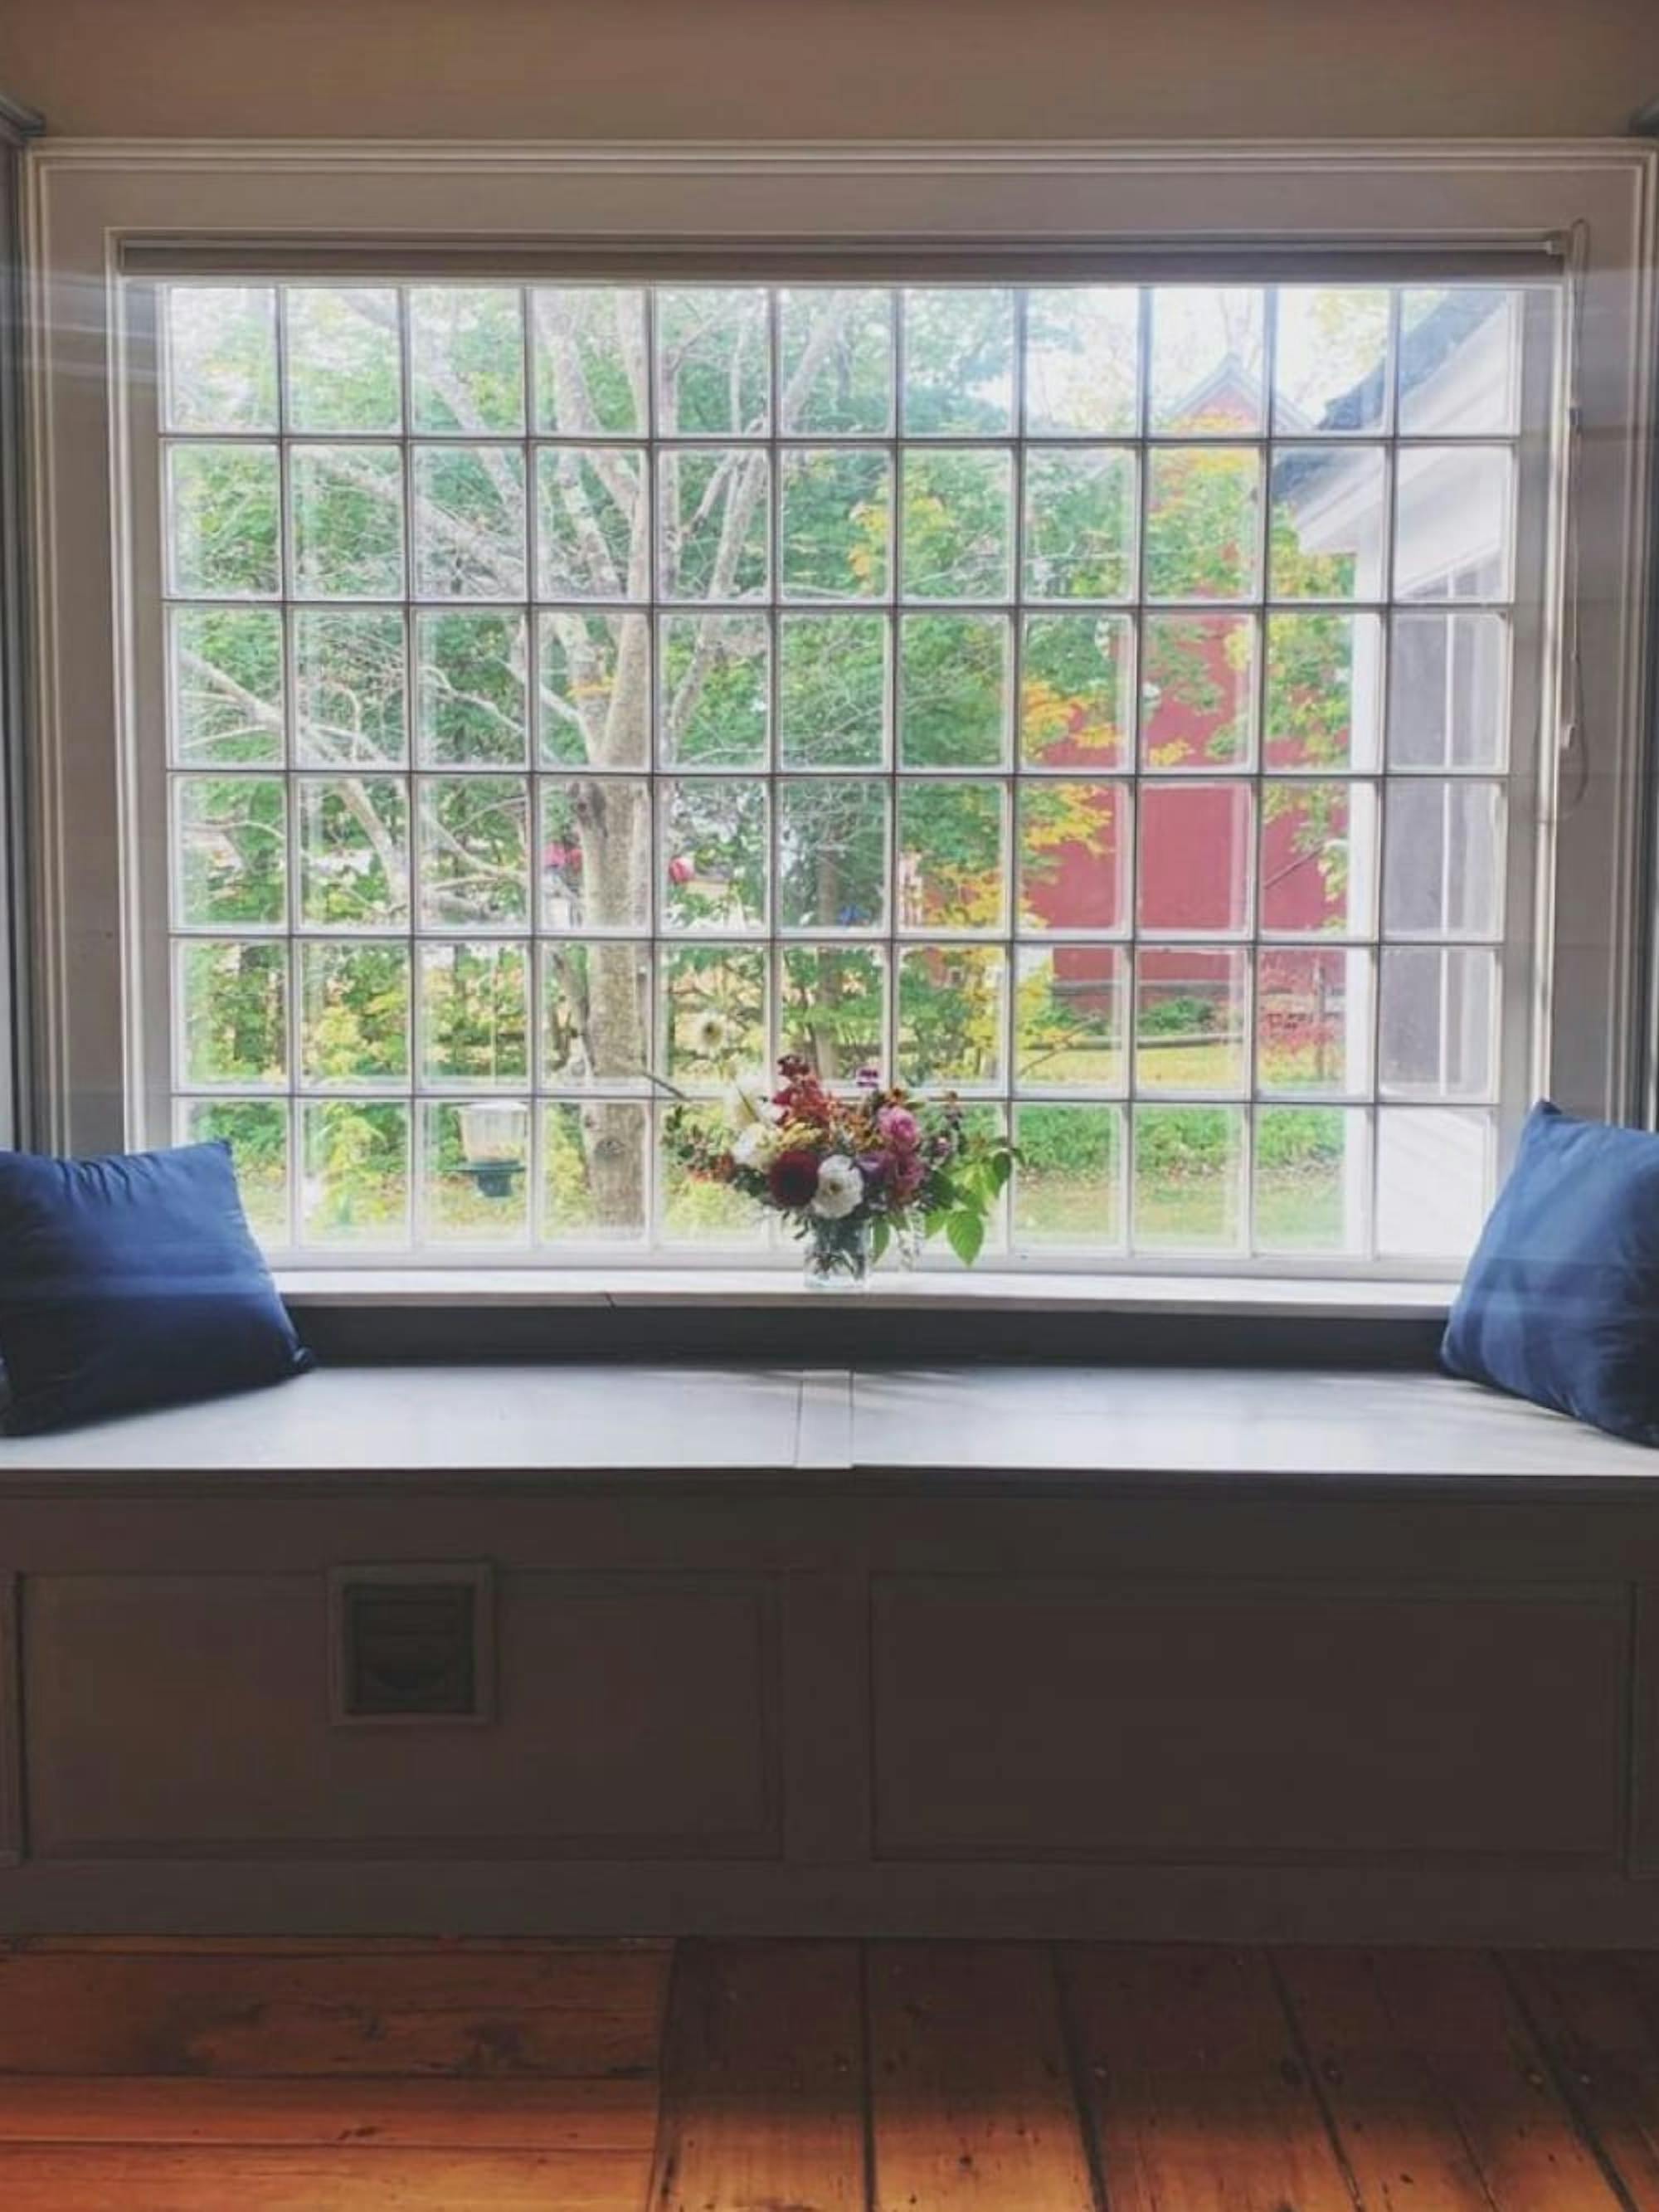 A window seat looking out on fall foliage. The bench is framed by two navy pillows.